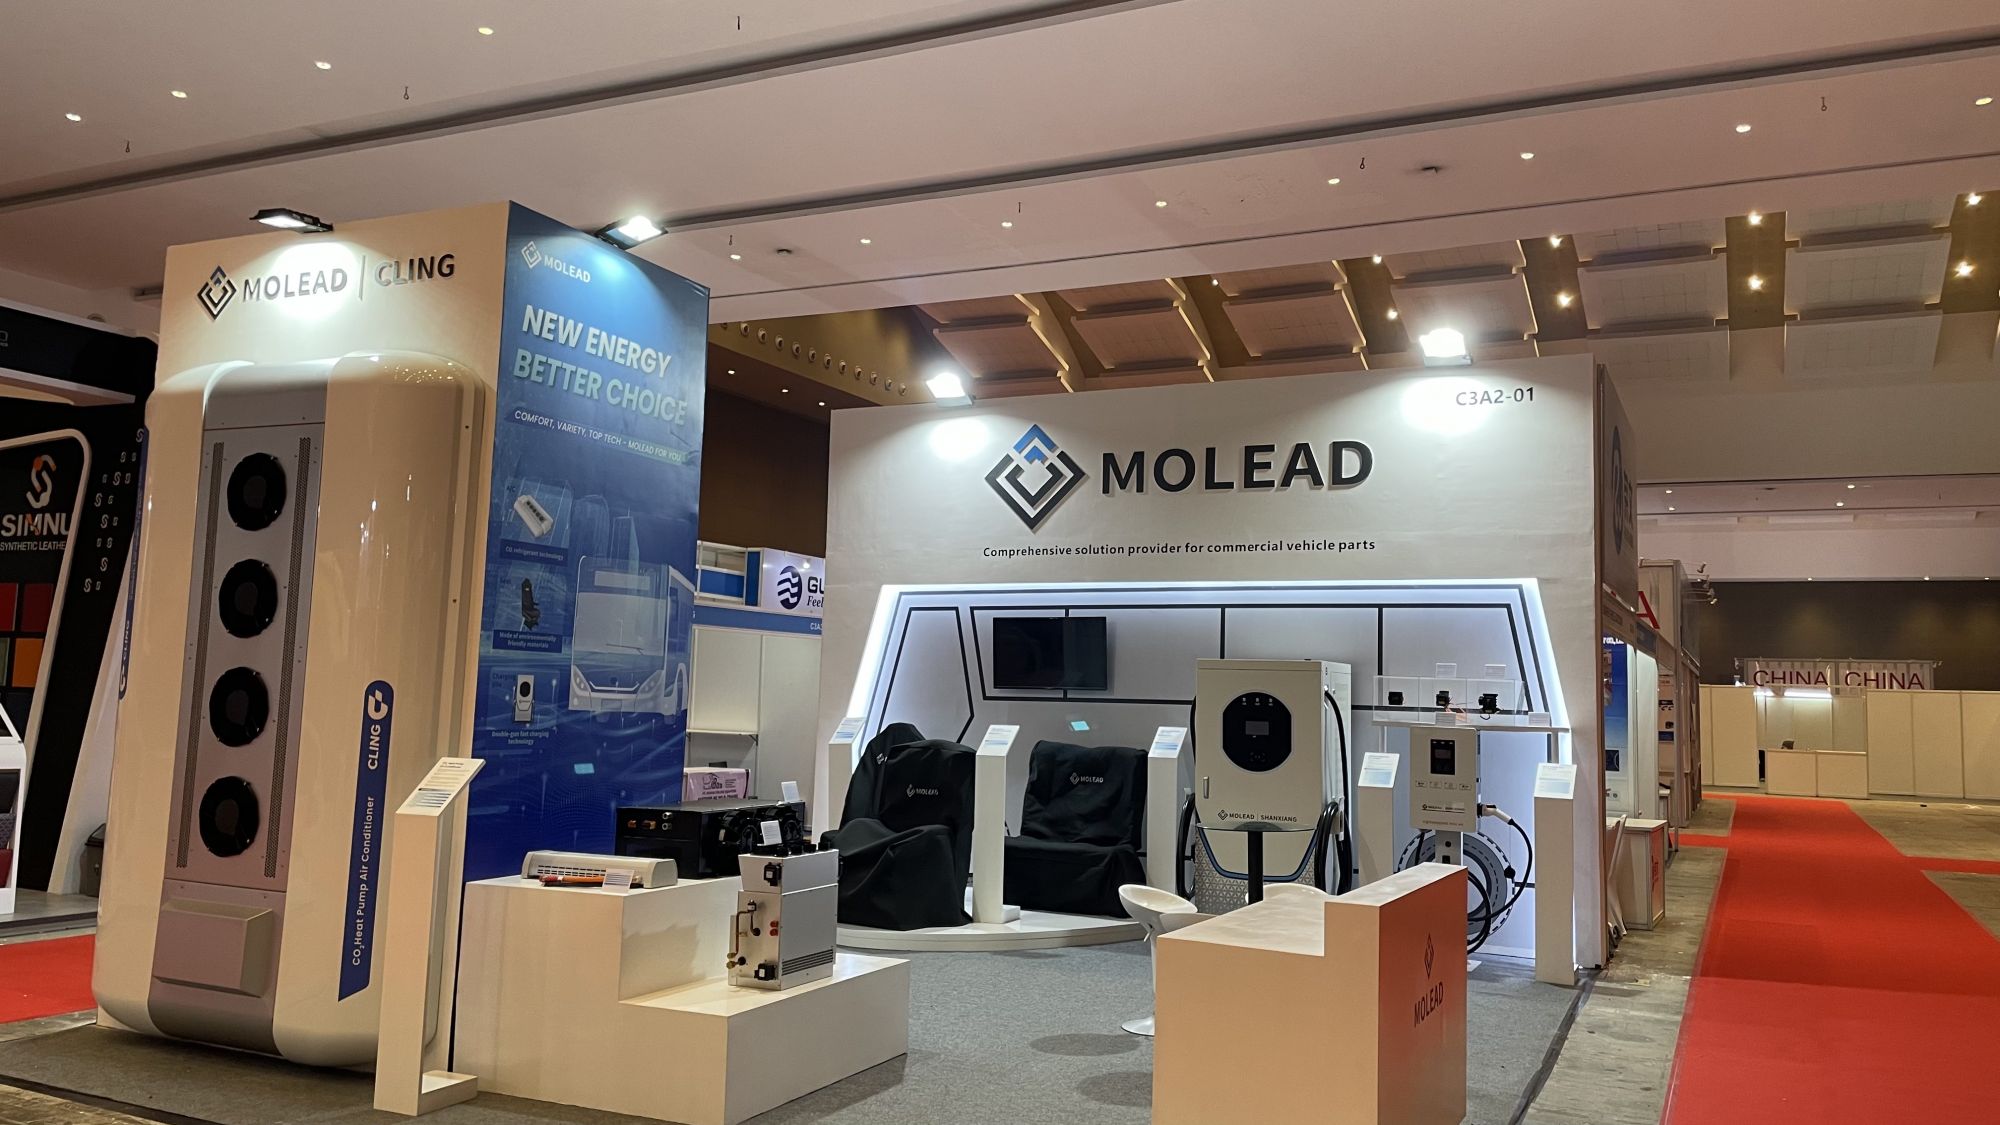 molead cling bus hvac air conditioner system